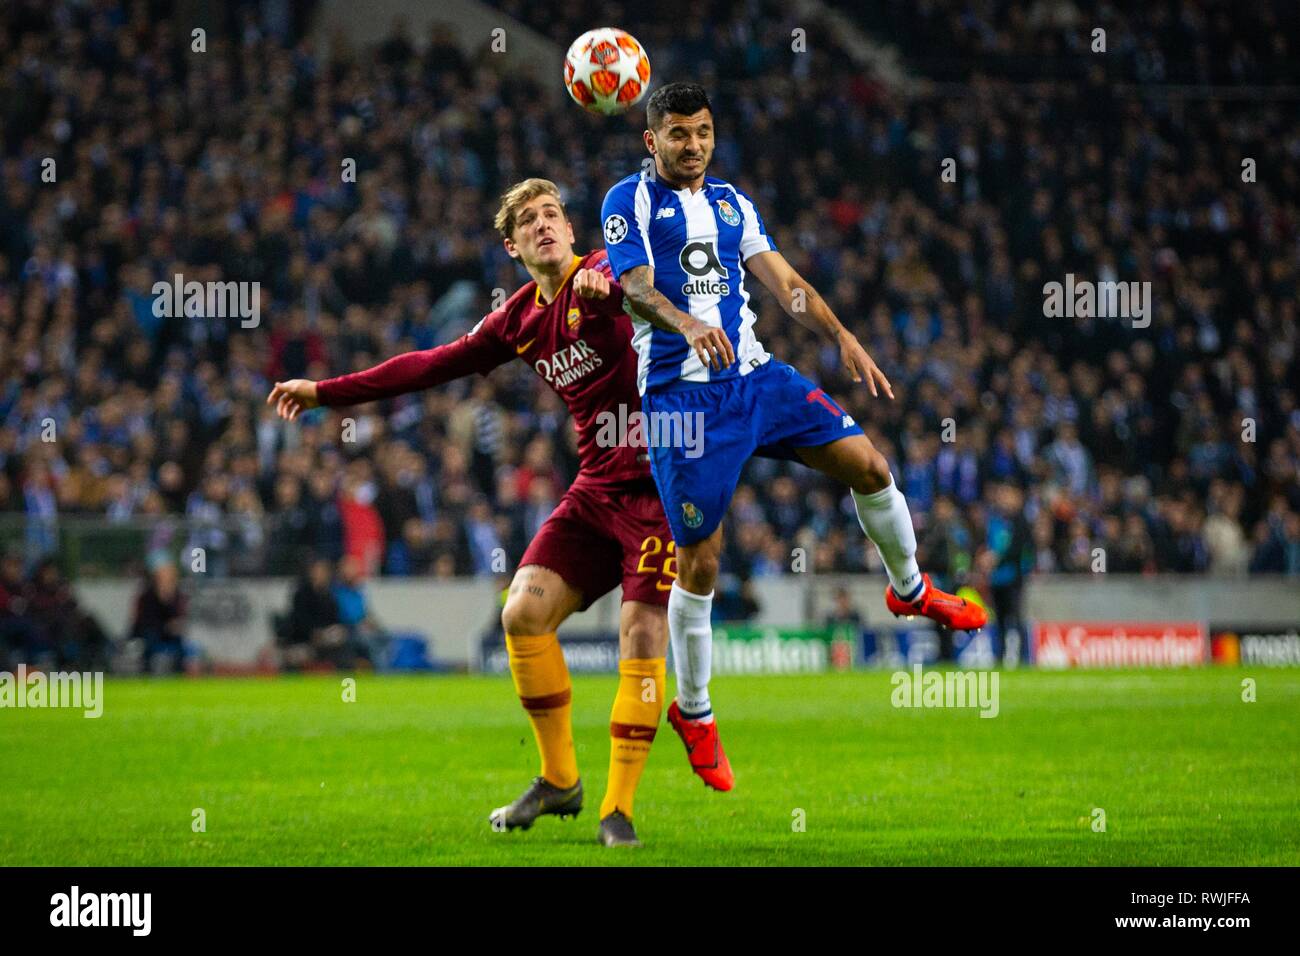 FC Porto's player Fernando Andrade dos Santos (R) vies for the ball with AS Roma's player Nicolò Zaniolo (L) during the match against AS Roma for the UEFA Champions League round 16th 2nd leg at Dragon Stadium in Porto. Final Score: FC Porto 3-1 AS Roma Stock Photo